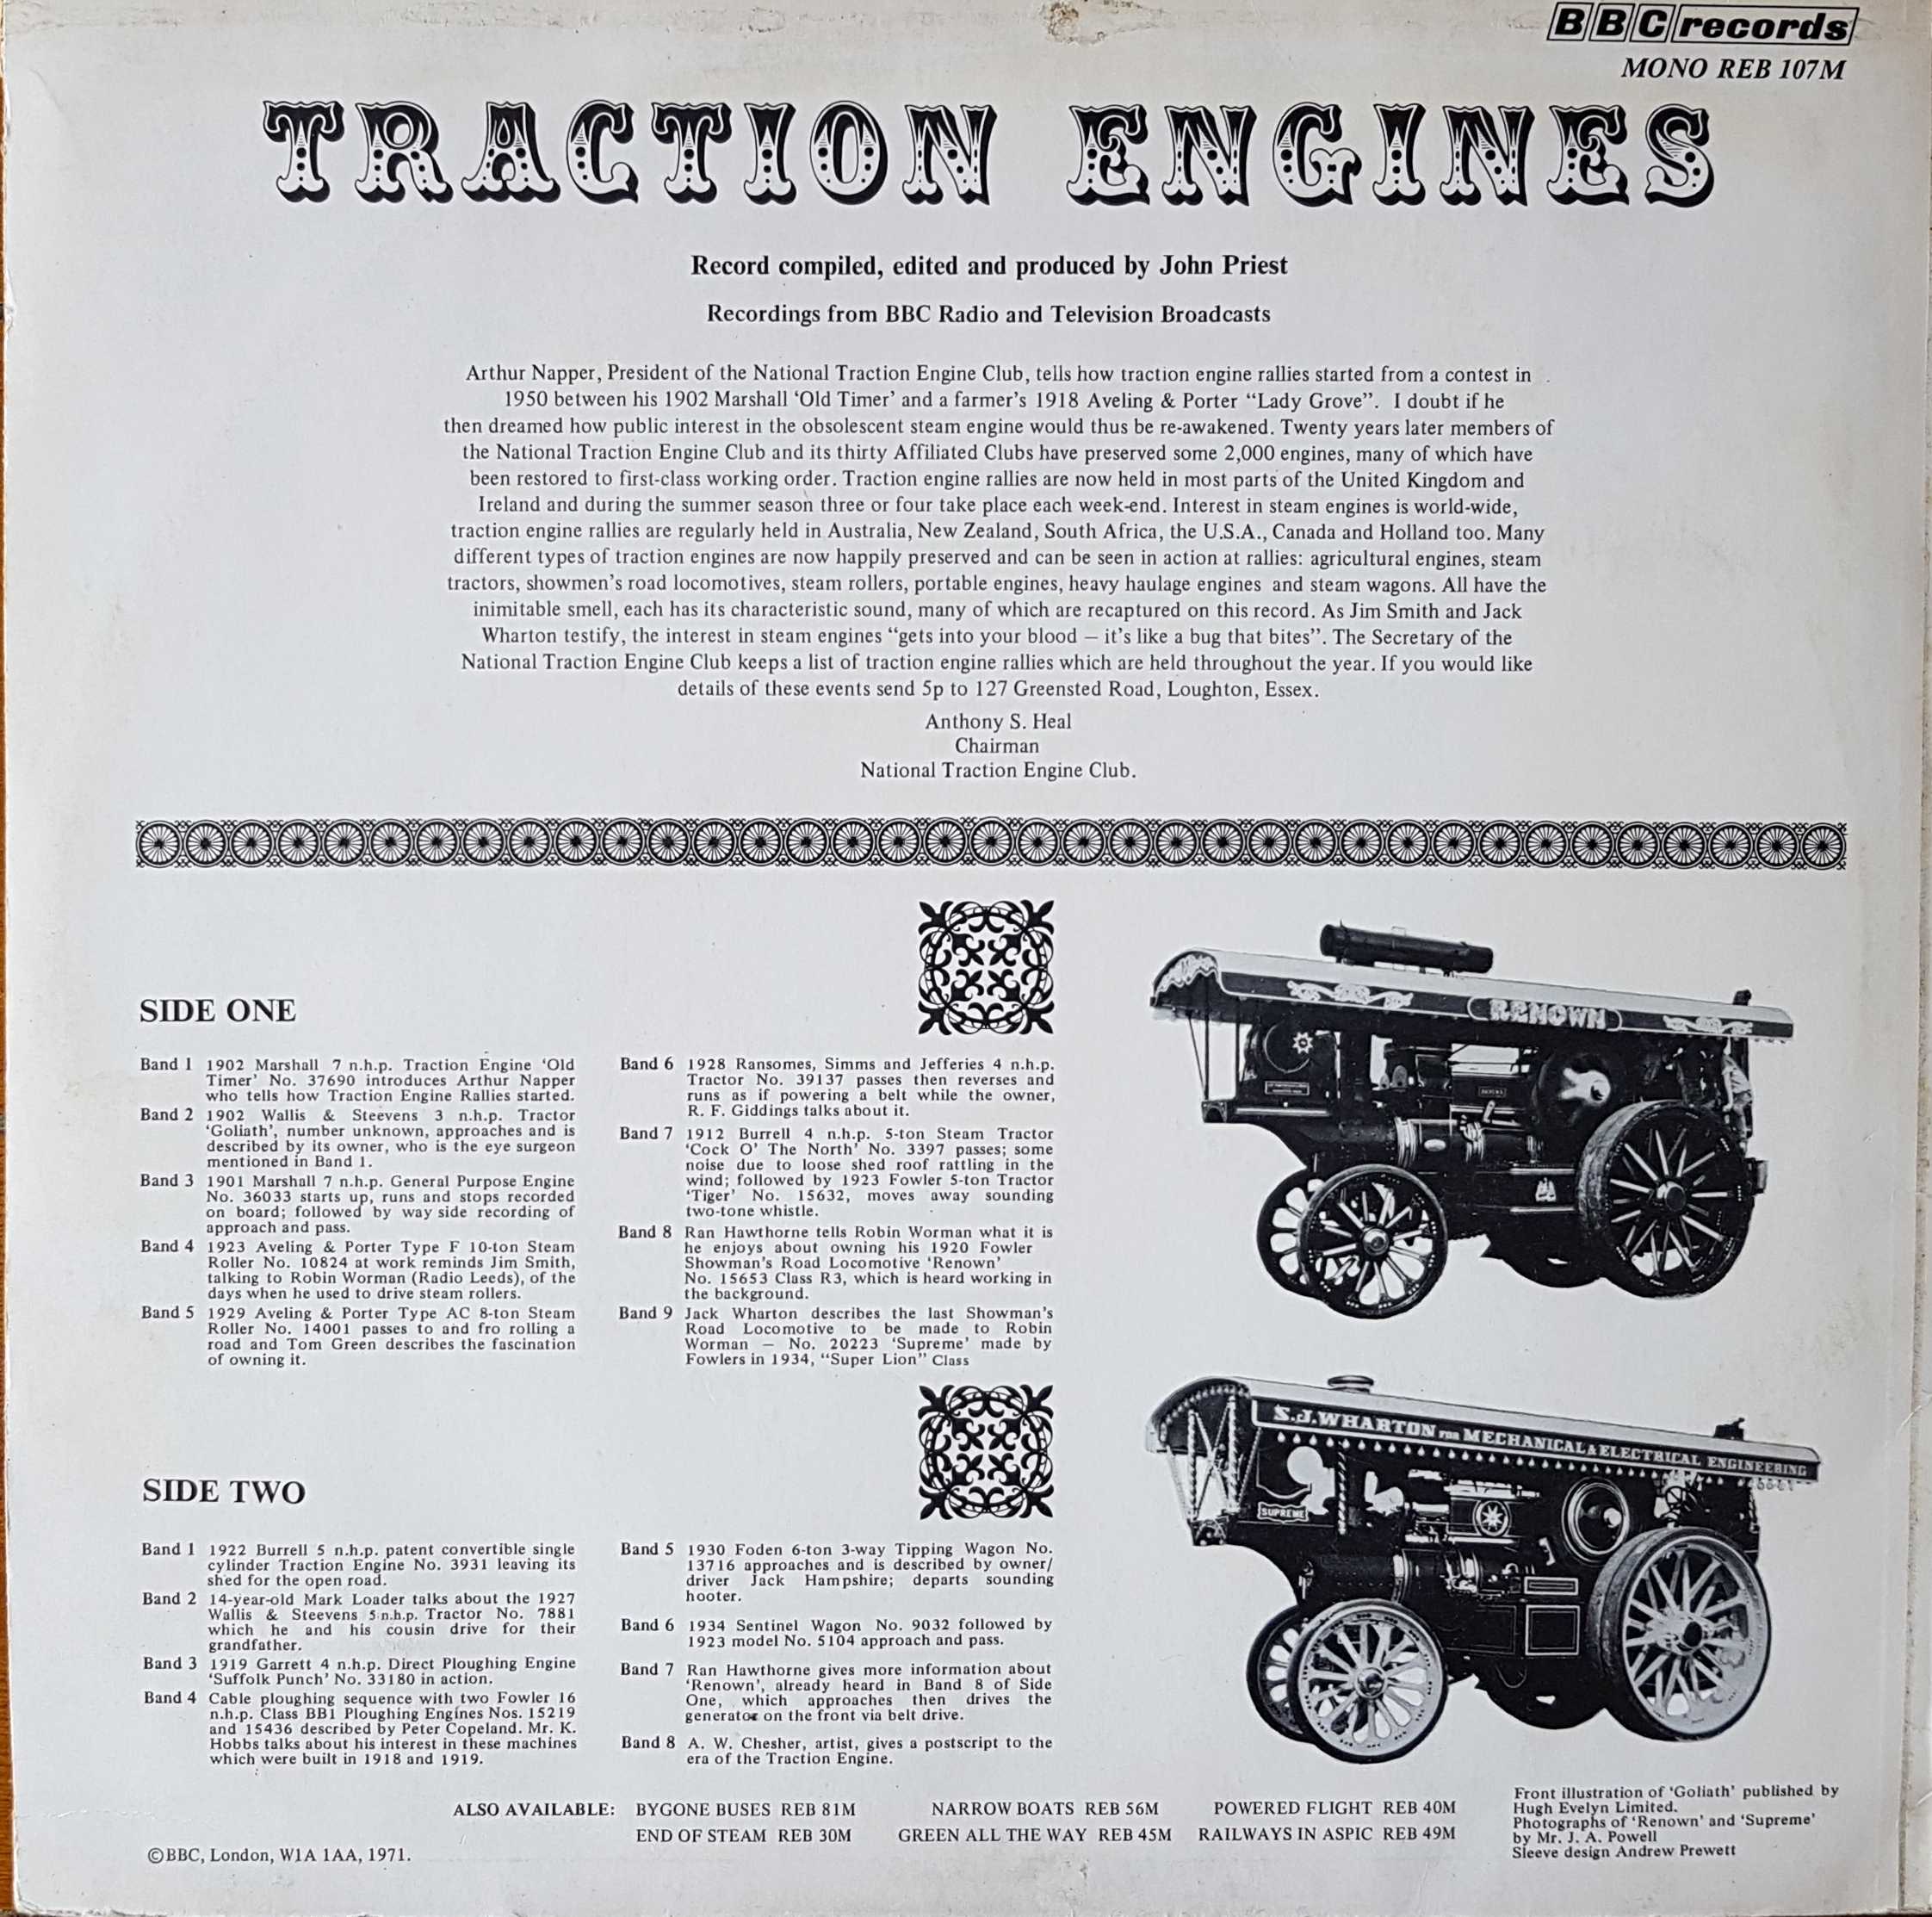 Picture of REB 107 Traction engines by artist John Priest from the BBC records and Tapes library